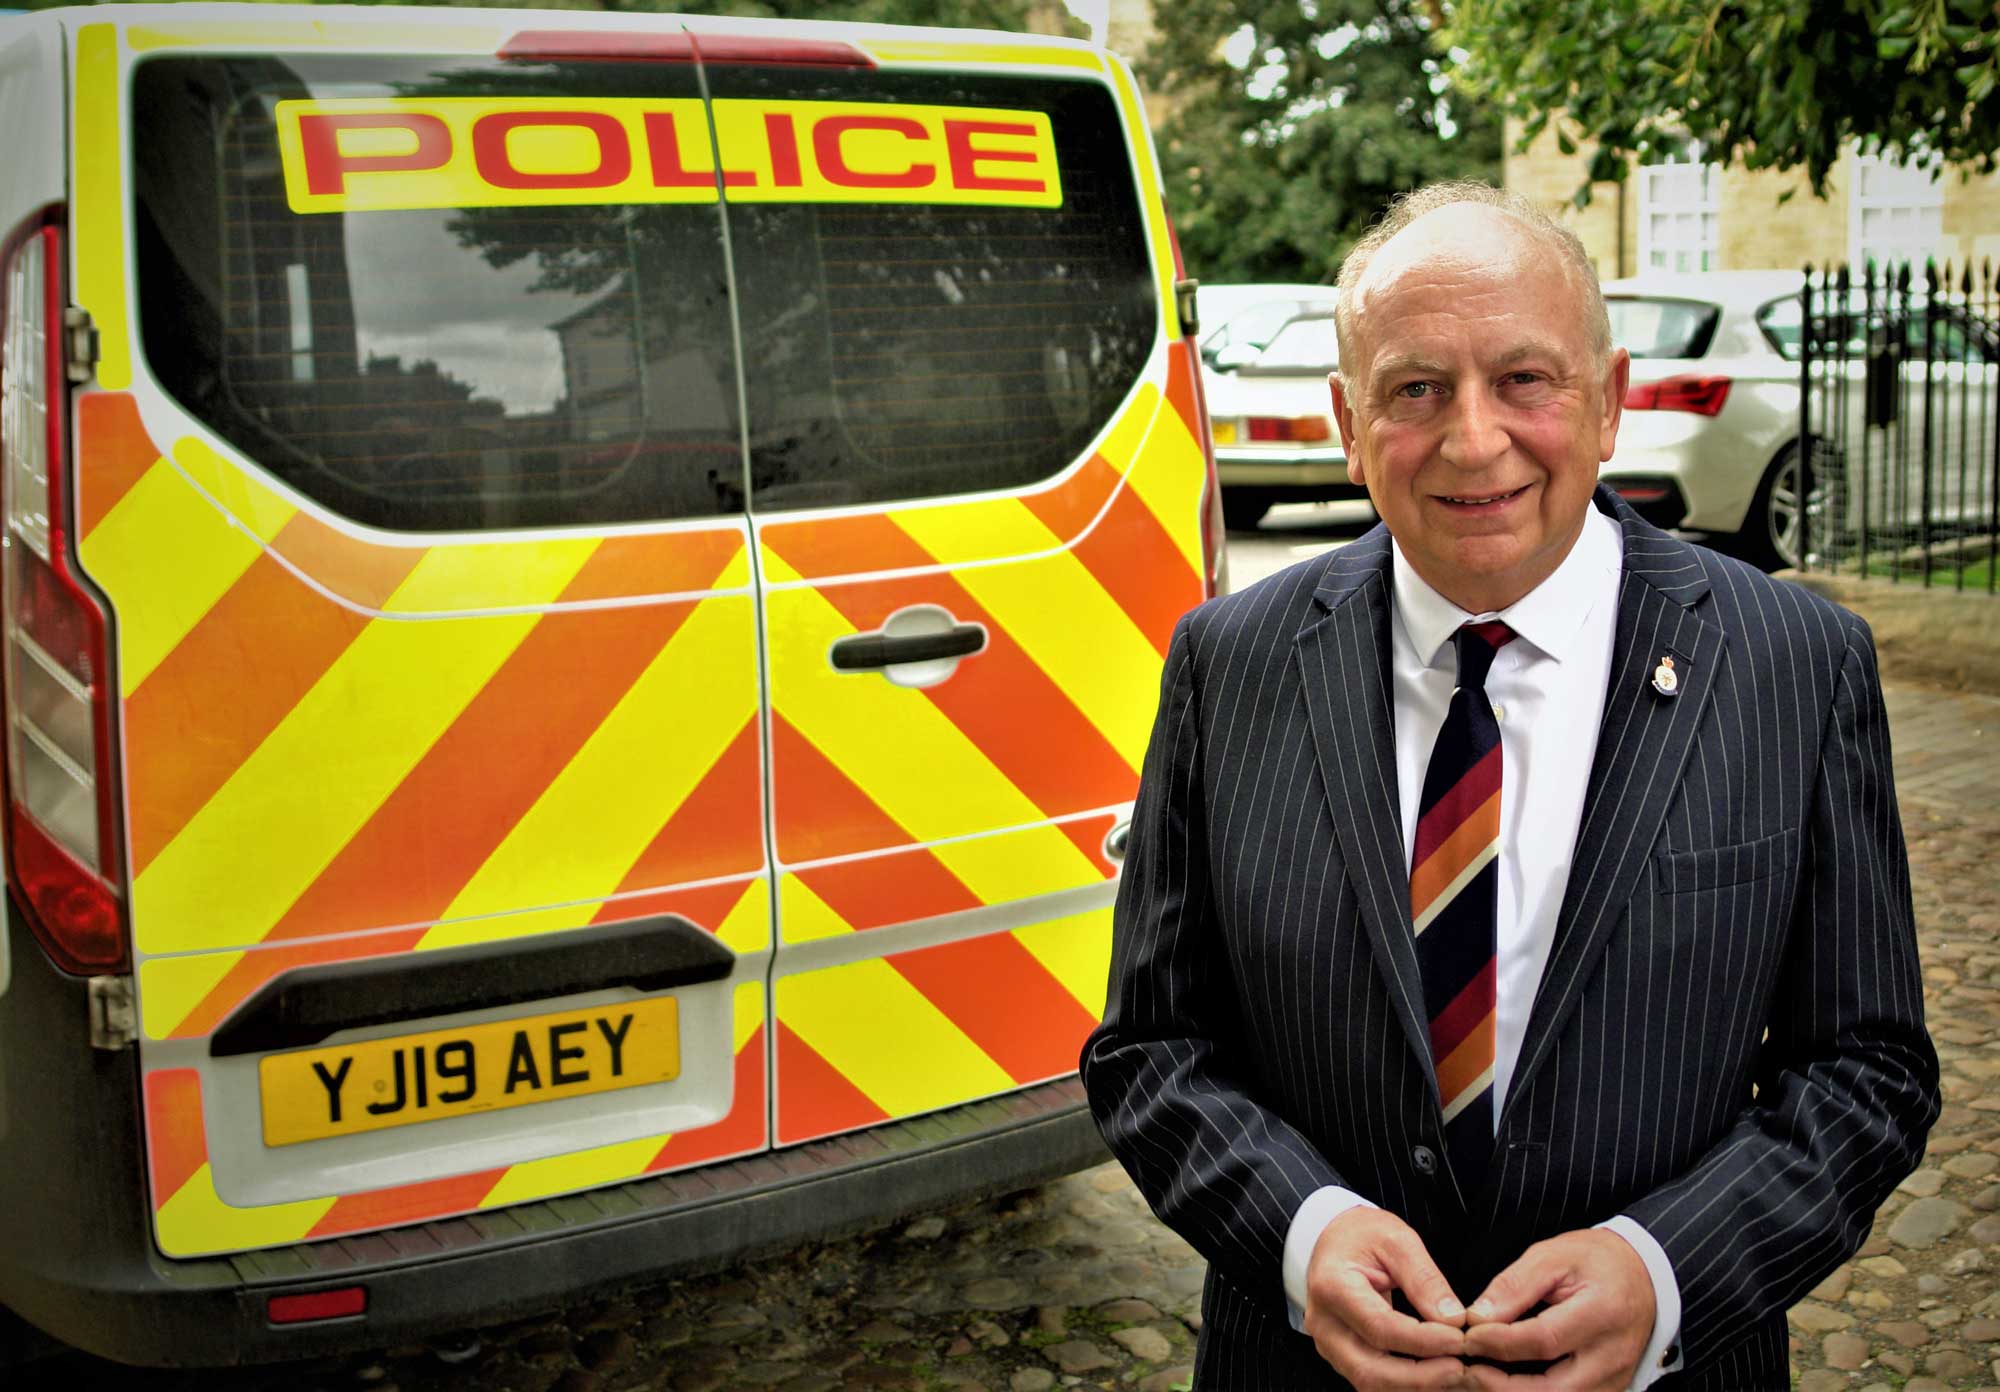 Philip Allott, Prospective Police Fire and Crime Commissioner of North Yorkshire